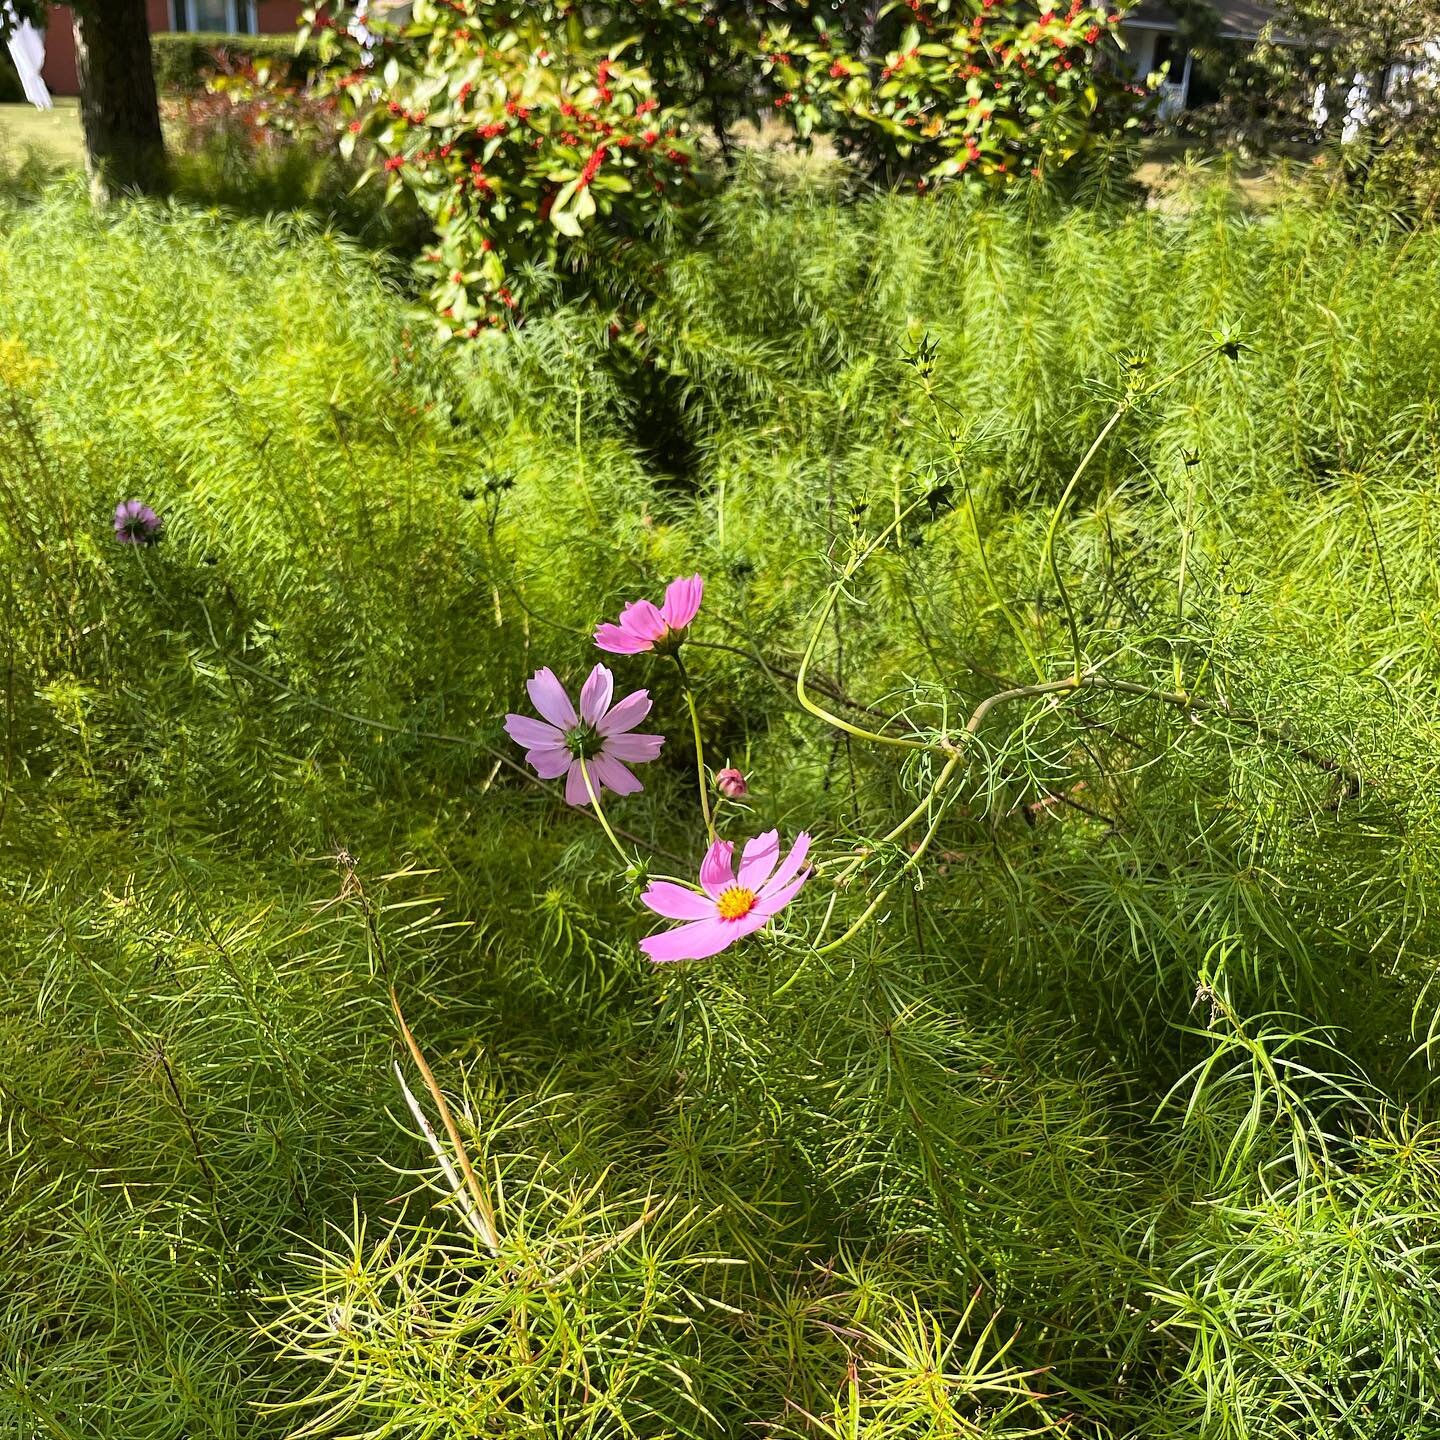 Trying out some Cosmos in the Amsonia this fall! They get so tall and leggy, but bloom just when the Amsonia starts it&rsquo;s fall color and have similarly textured foliage so I thought they might be a fun (nonnative) annual to play with! Still to c